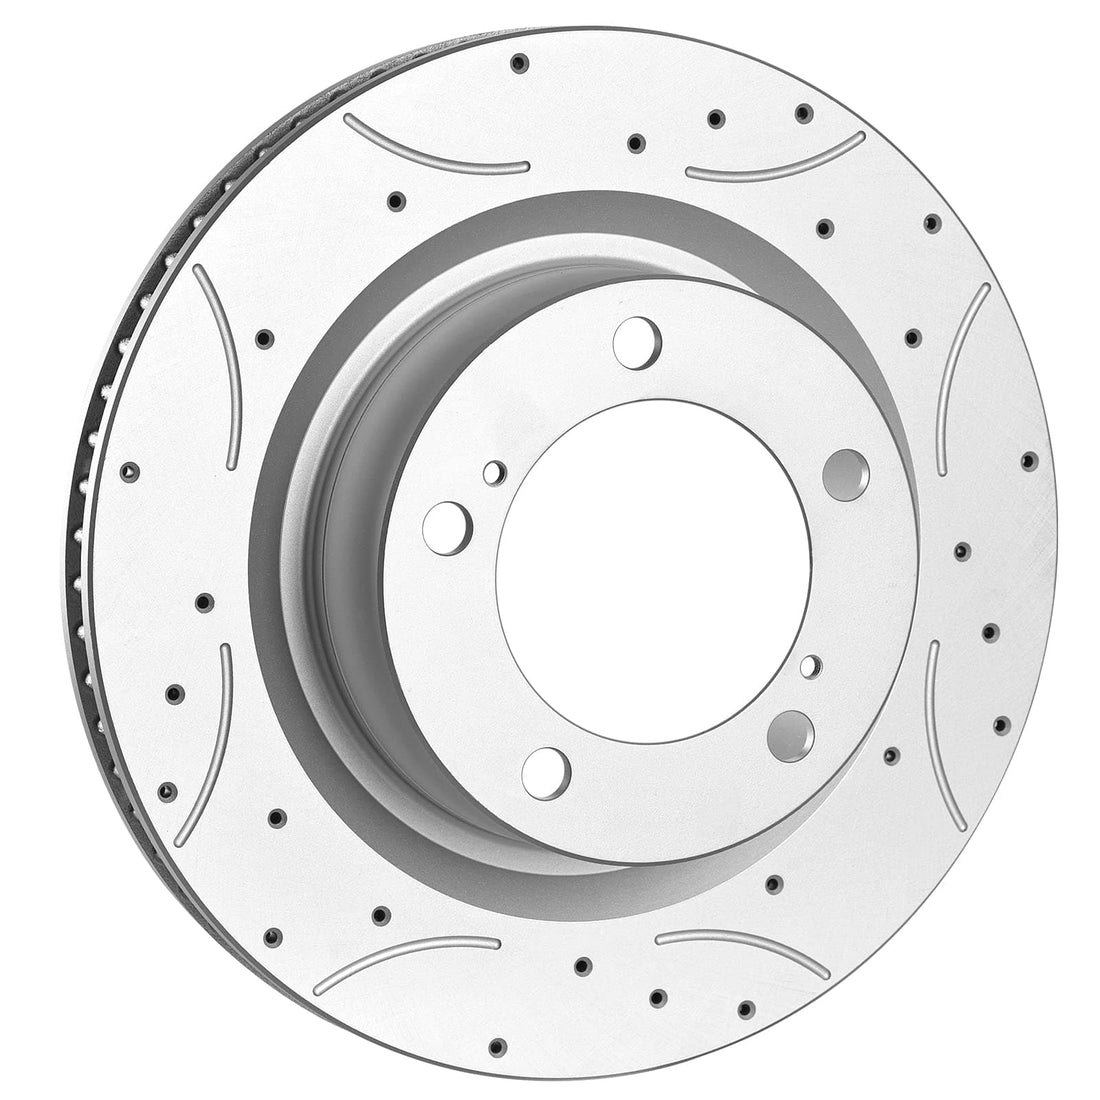 Front Drilled and Slotted Disc Brake Rotors, Perforated marking disk DS31482GMT (one set) Jiaomeite layer, High temperature resistance, Drive 60000 Miles